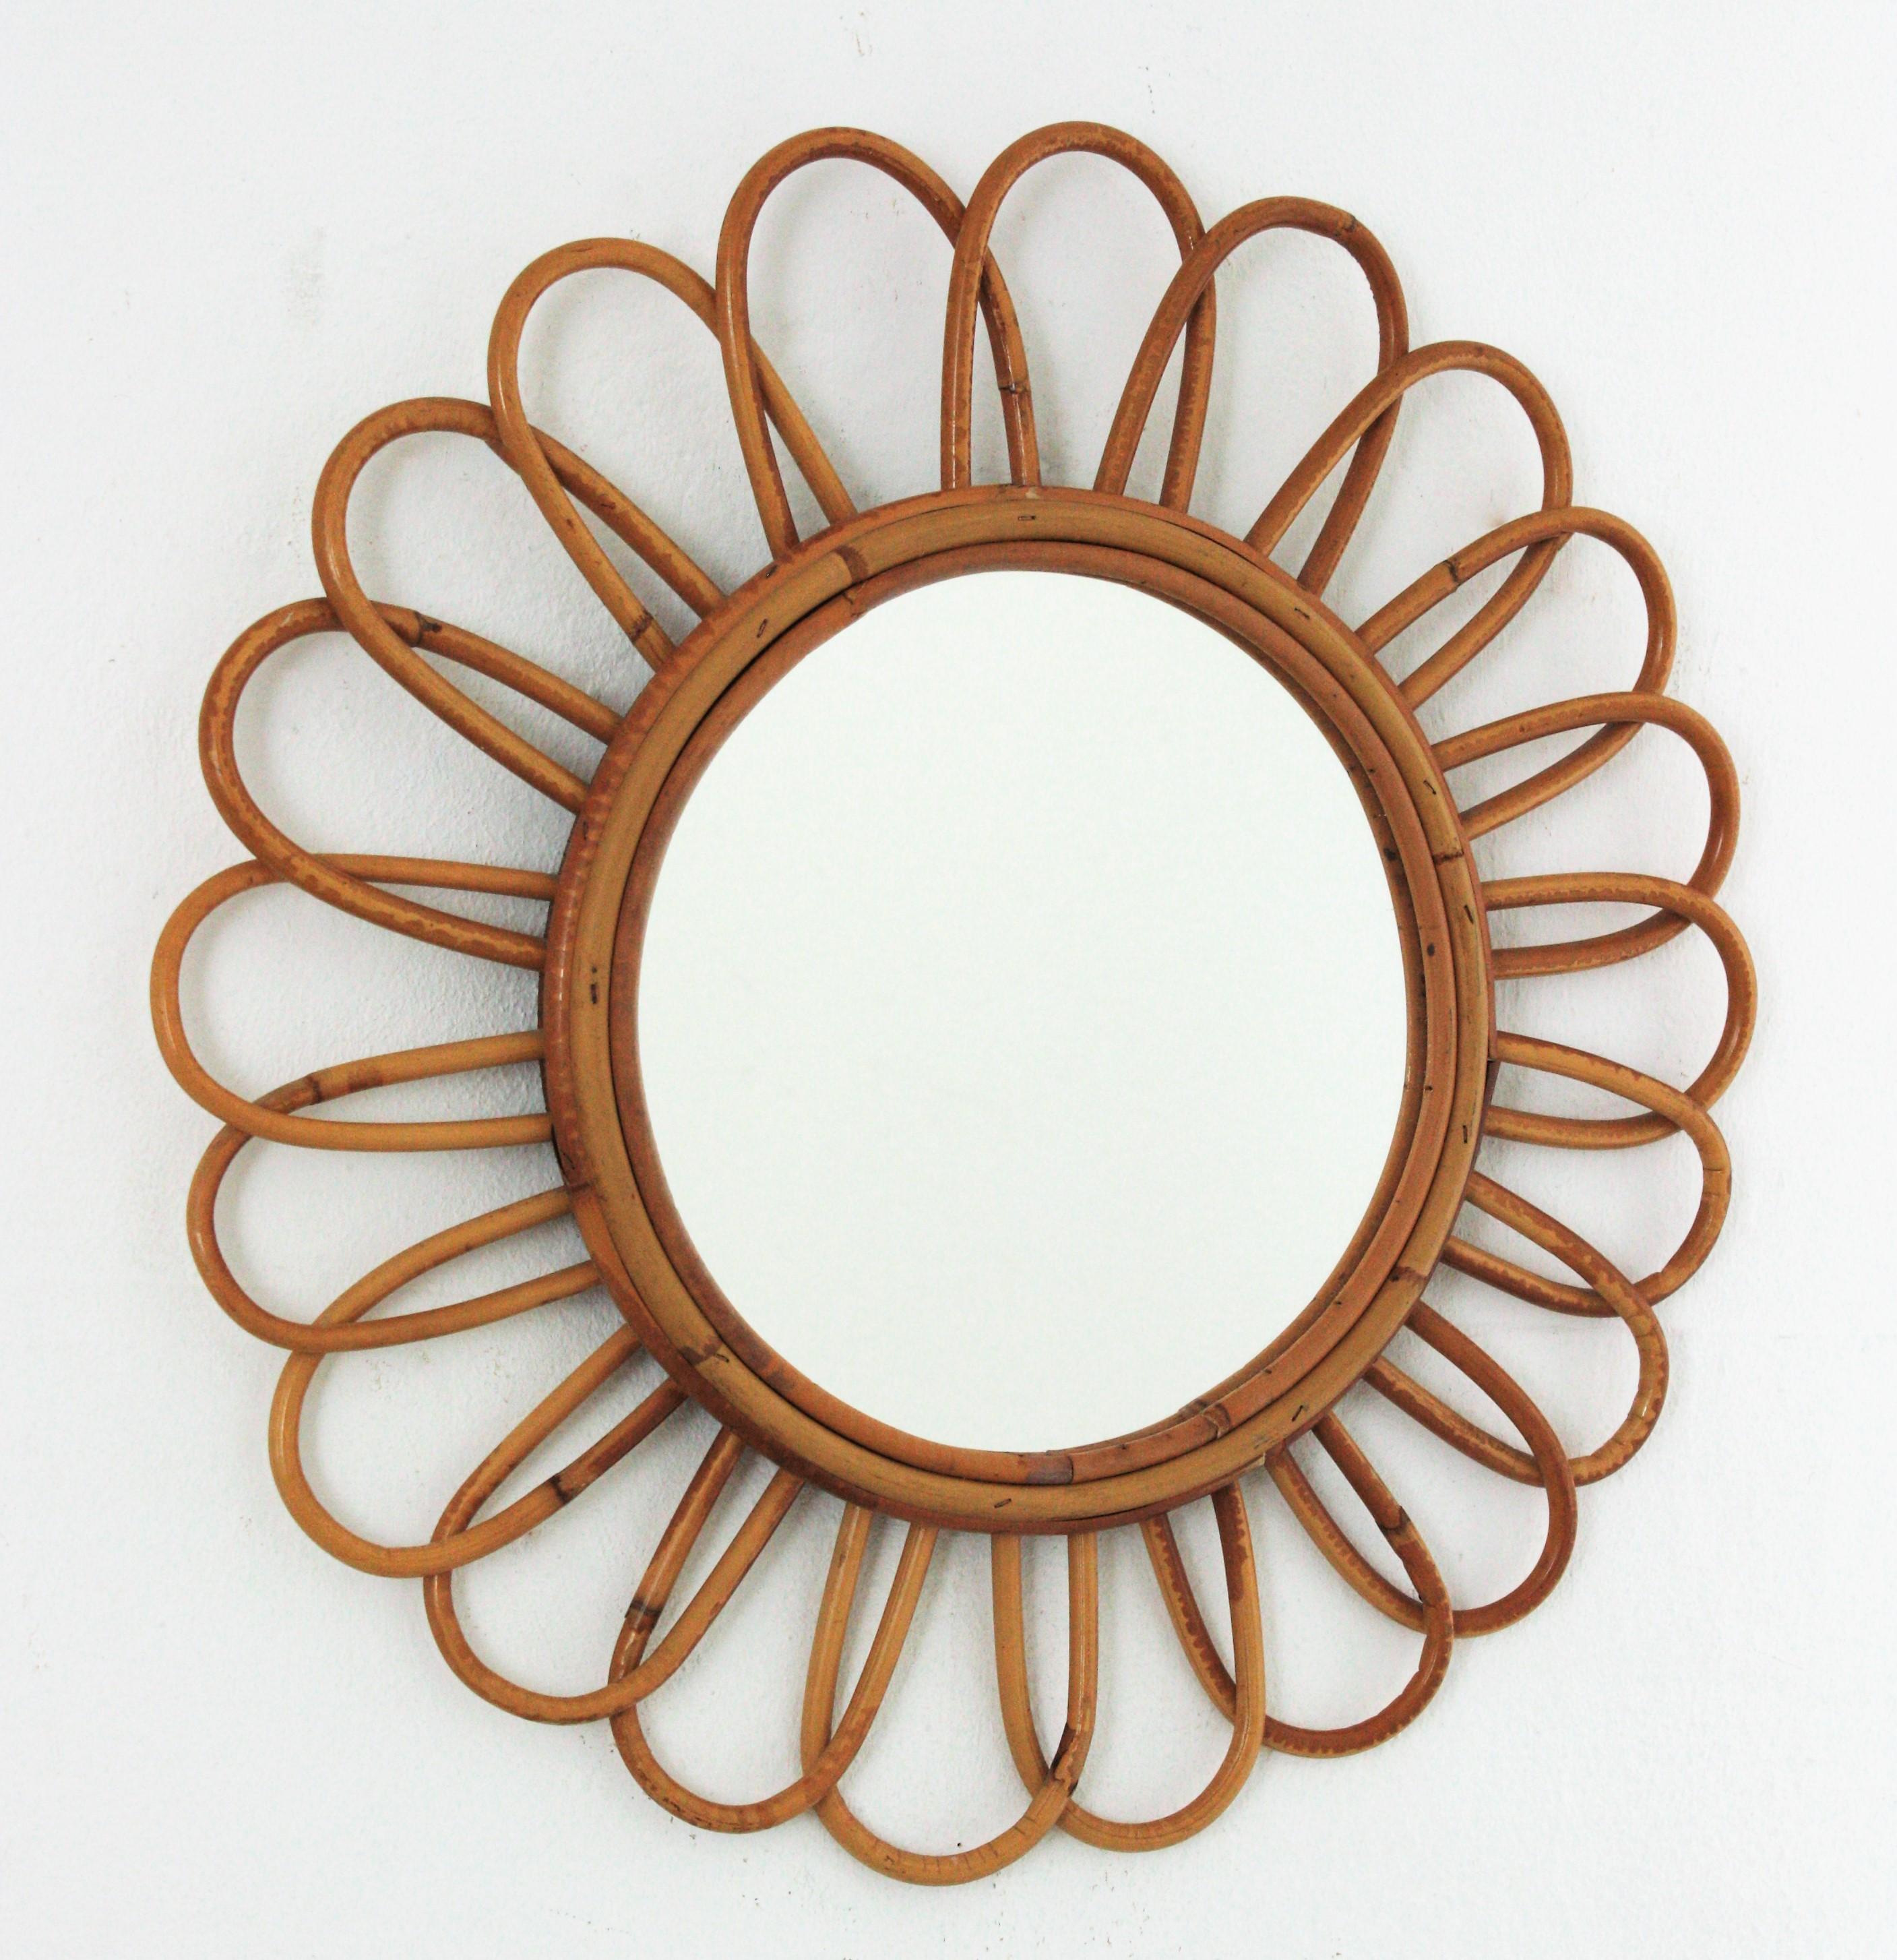 Lovely handcrafted rattan flower shaped mirror with all the taste of the Mediterranean coast style. France, 1960s.
This piece is in excellent vintage condition.
This mirror will be a fresh addition in a beach house, countryside house decoration or